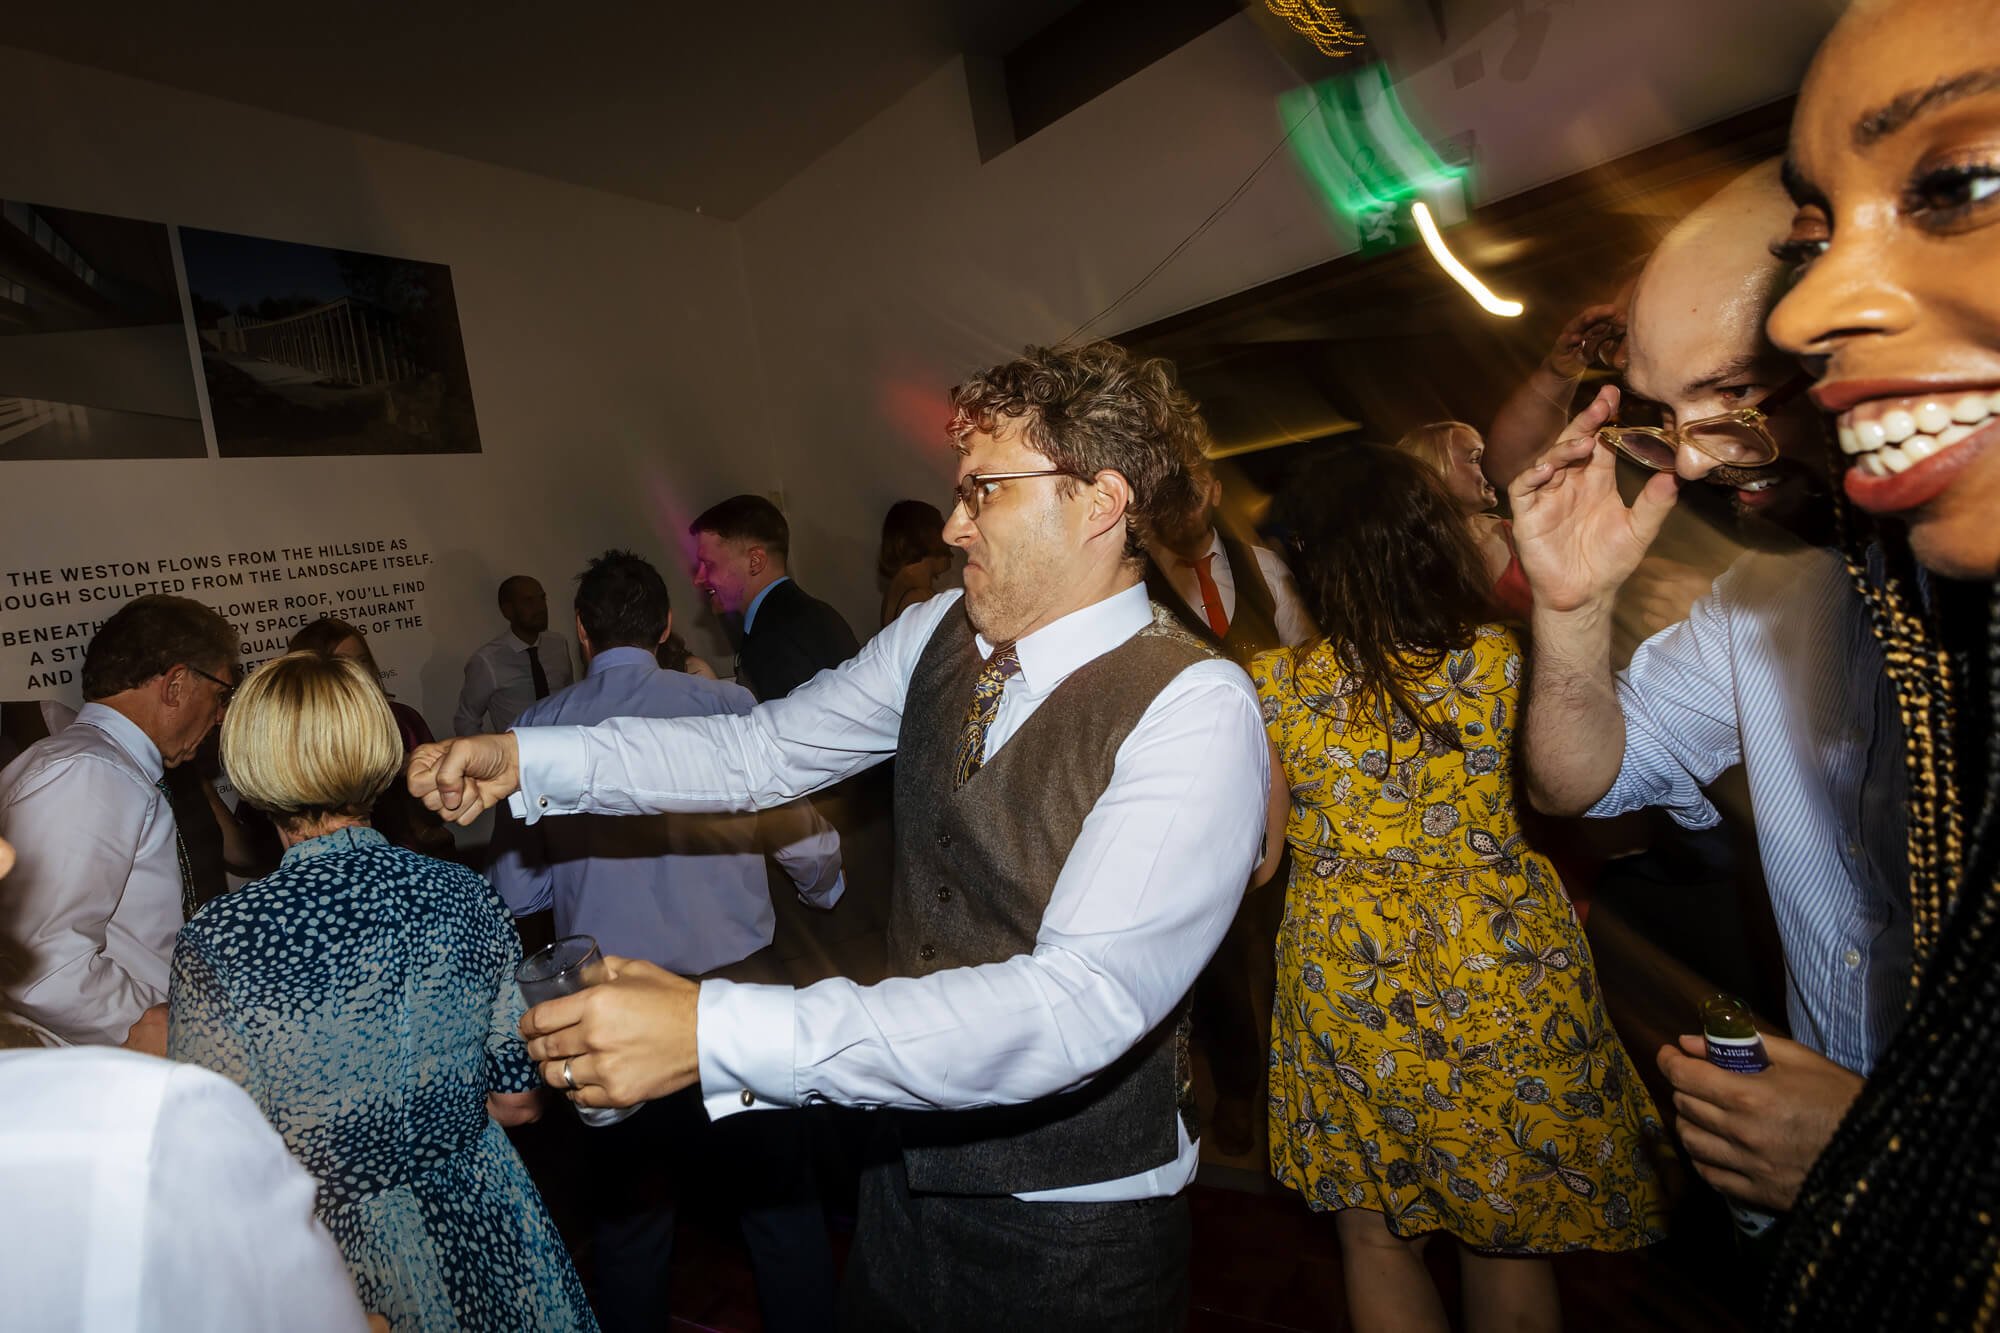 Dancing at a wedding in Yorkshire